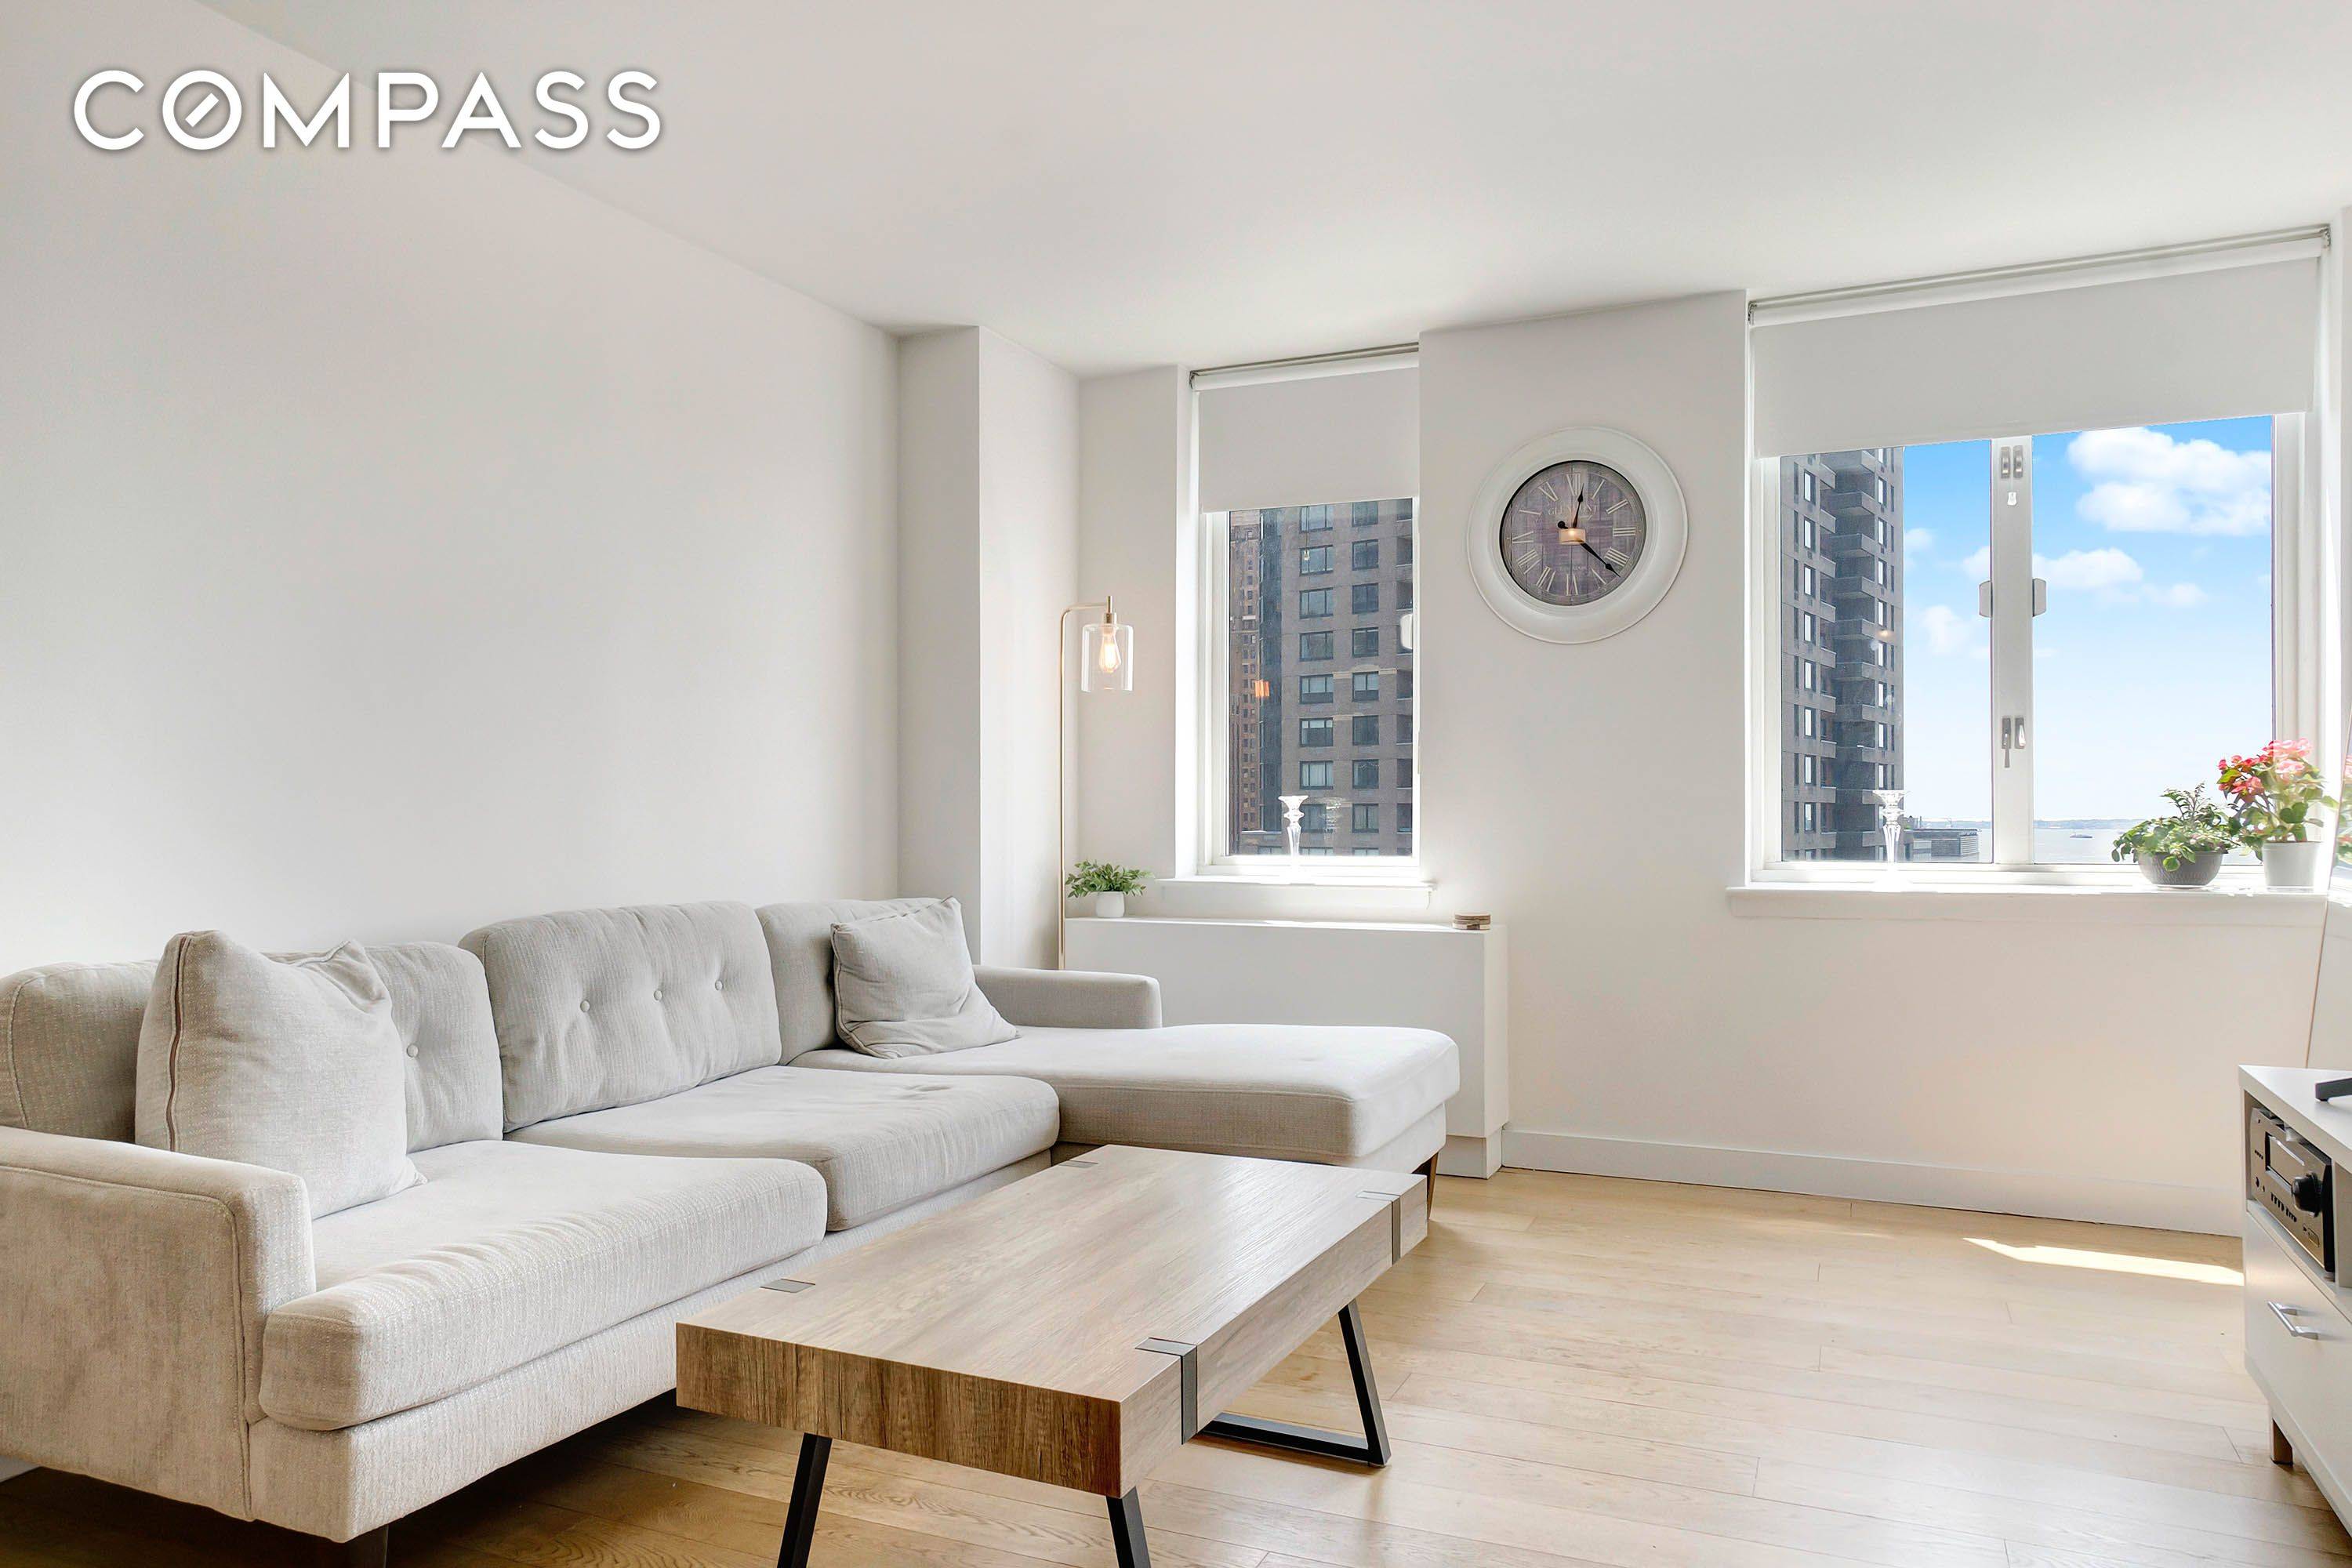 Welcome to a beautiful and spacious 1 bedroom apartment in the heart of Battery Park City !